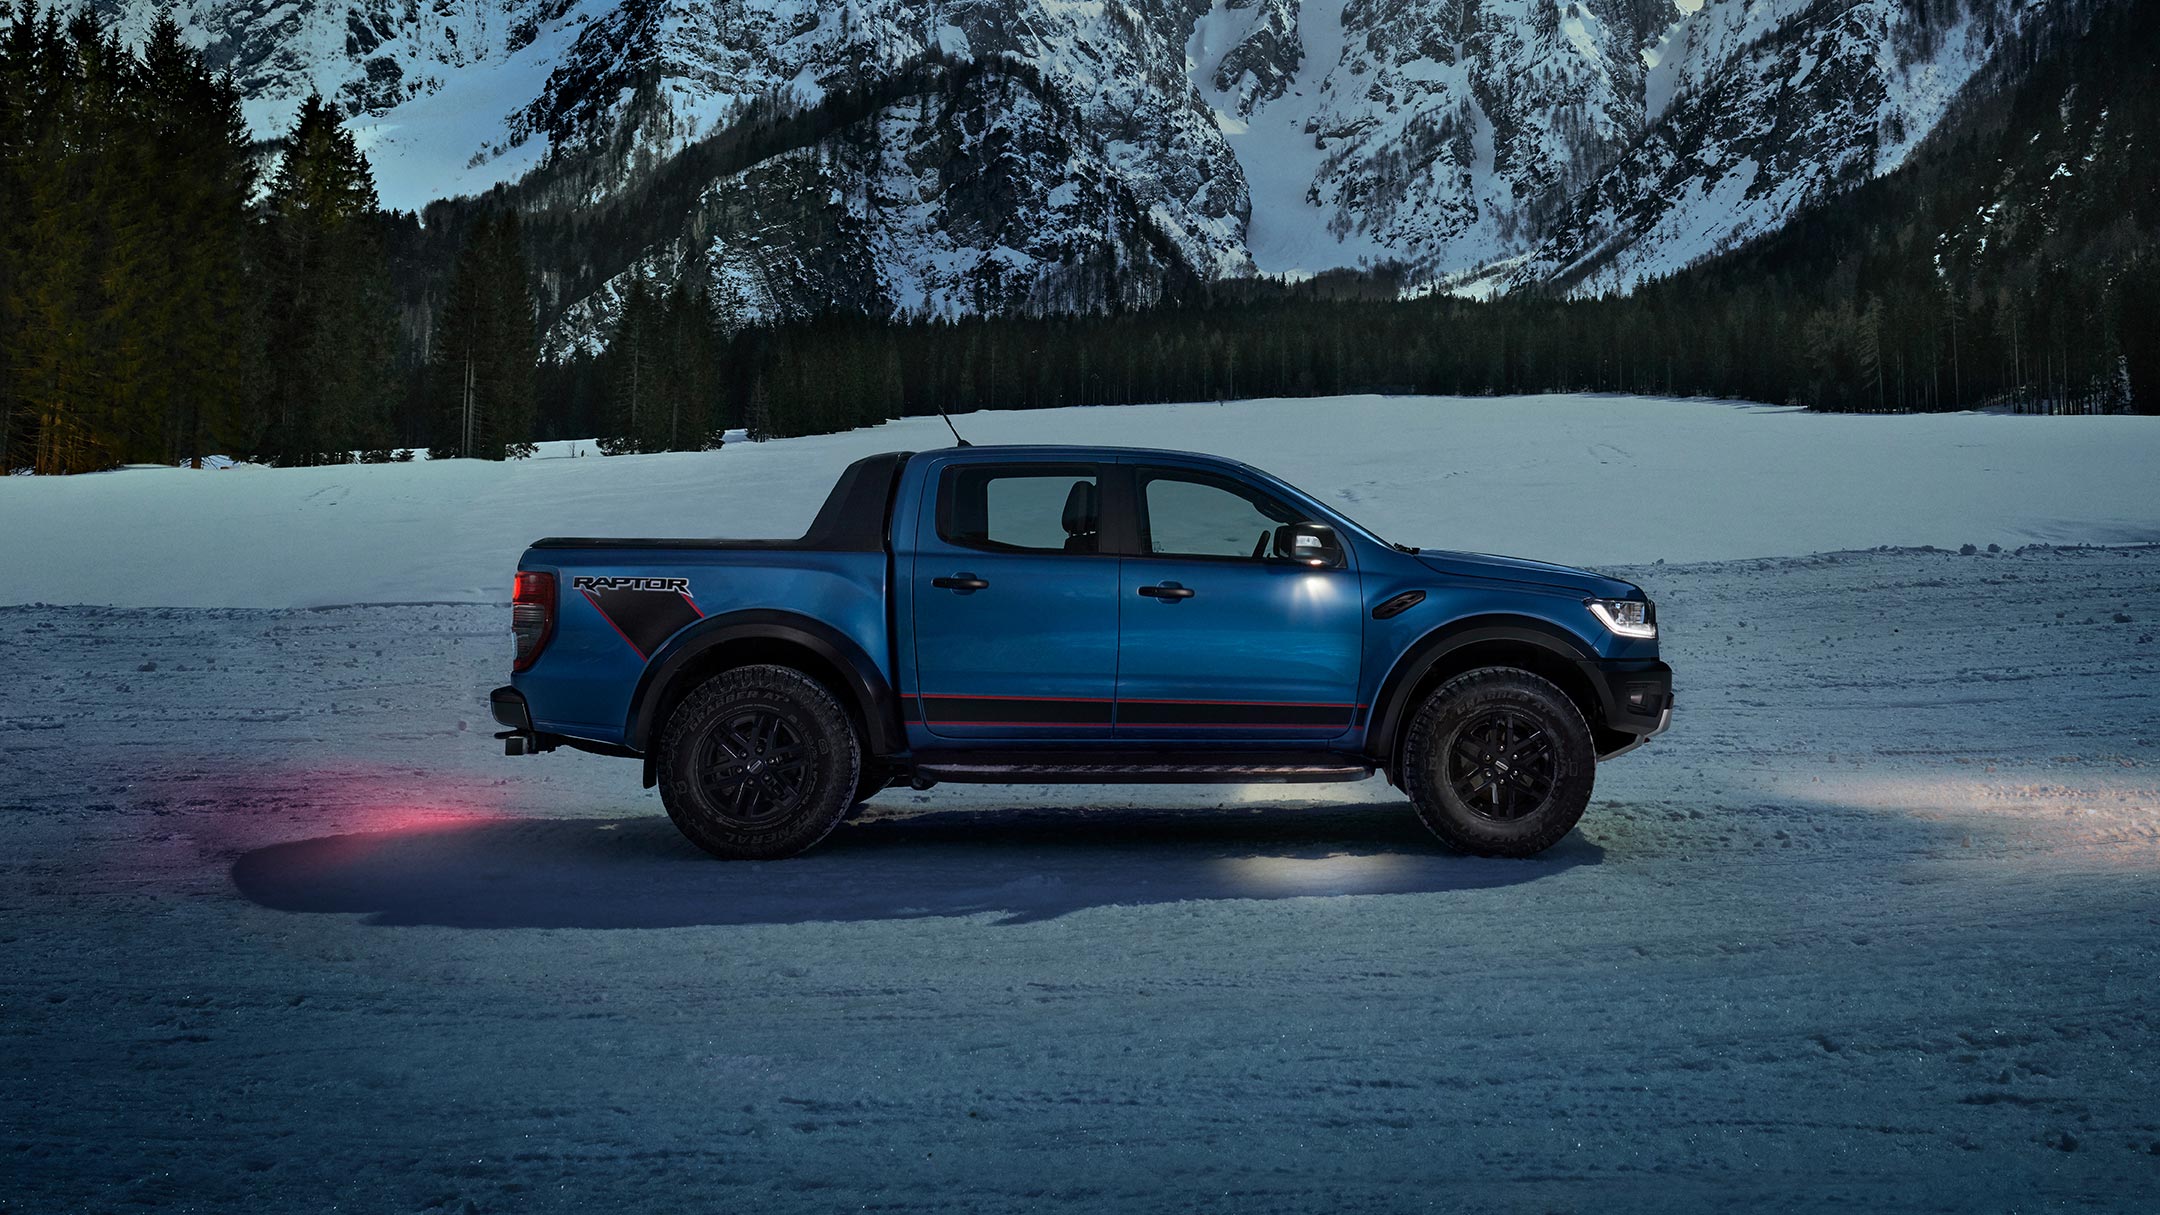 Ford Ranger Raptor Special Edition side view